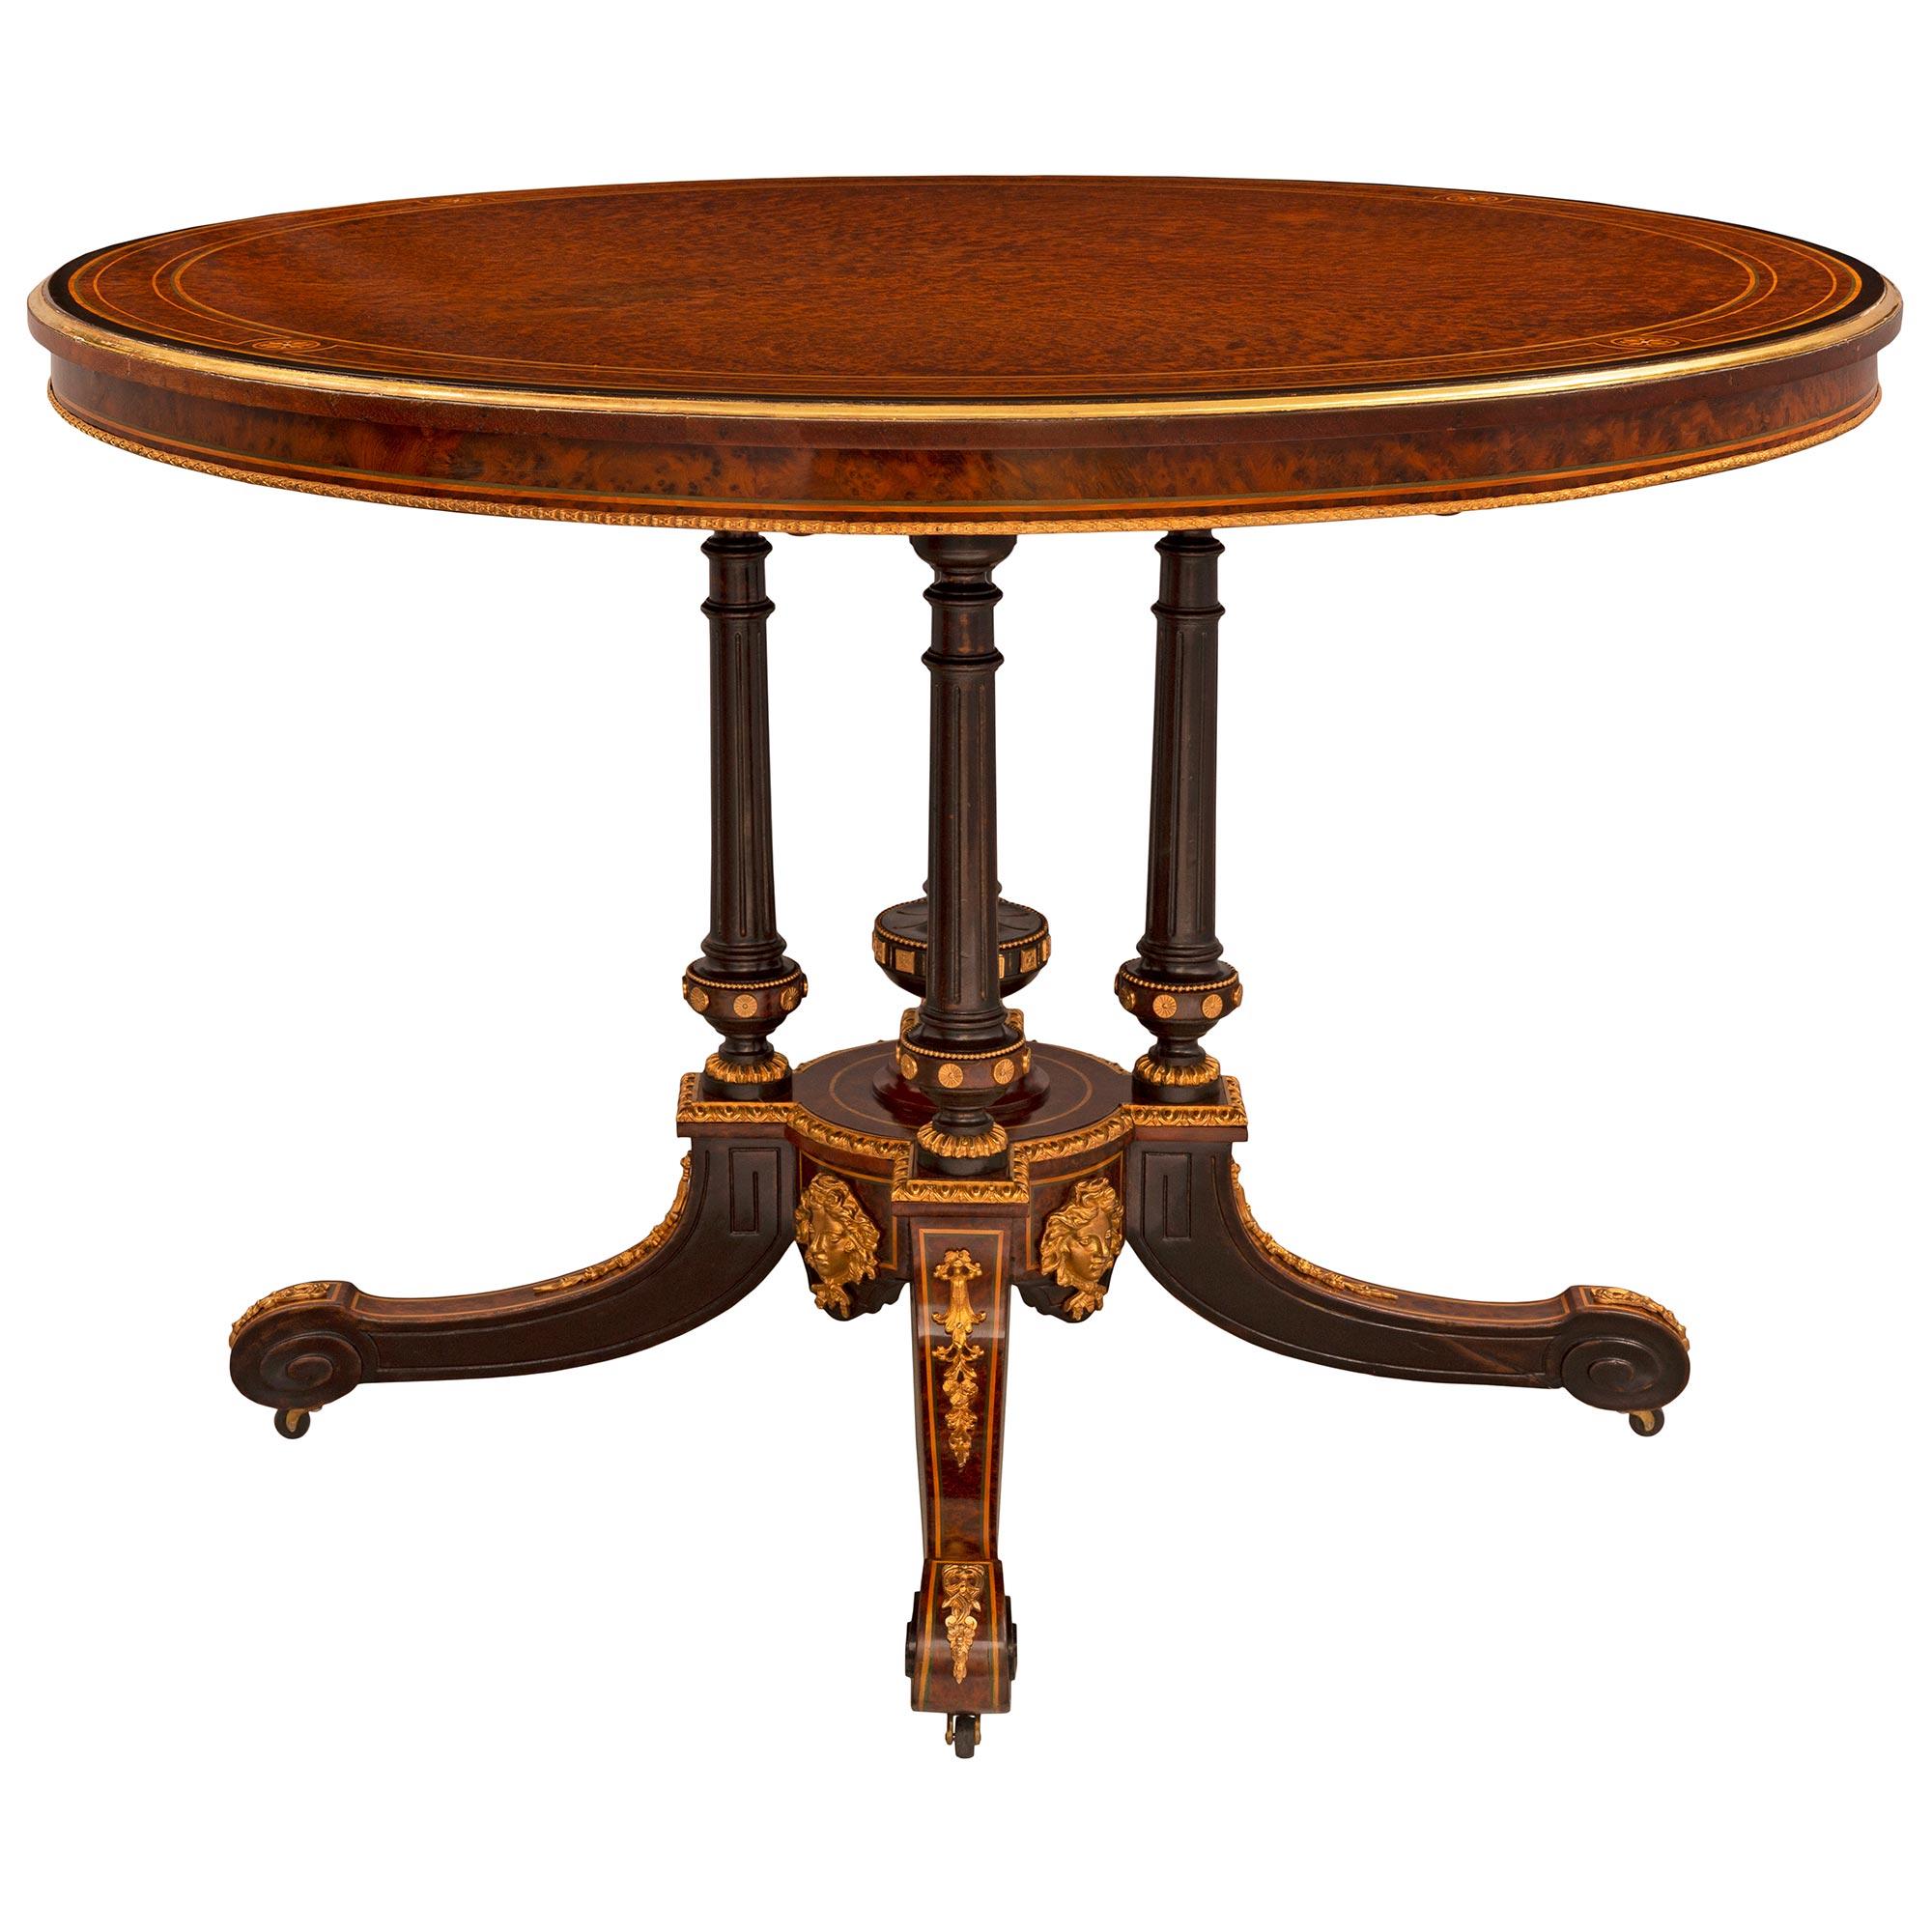 A stunning and extremely decorative English 19th century burl Walnut, Maplewood, Charmwood, and ormolu tilt top center table signed Edwards & Roberts. The circular table is raised by elegant lightly curved legs with their original casters and